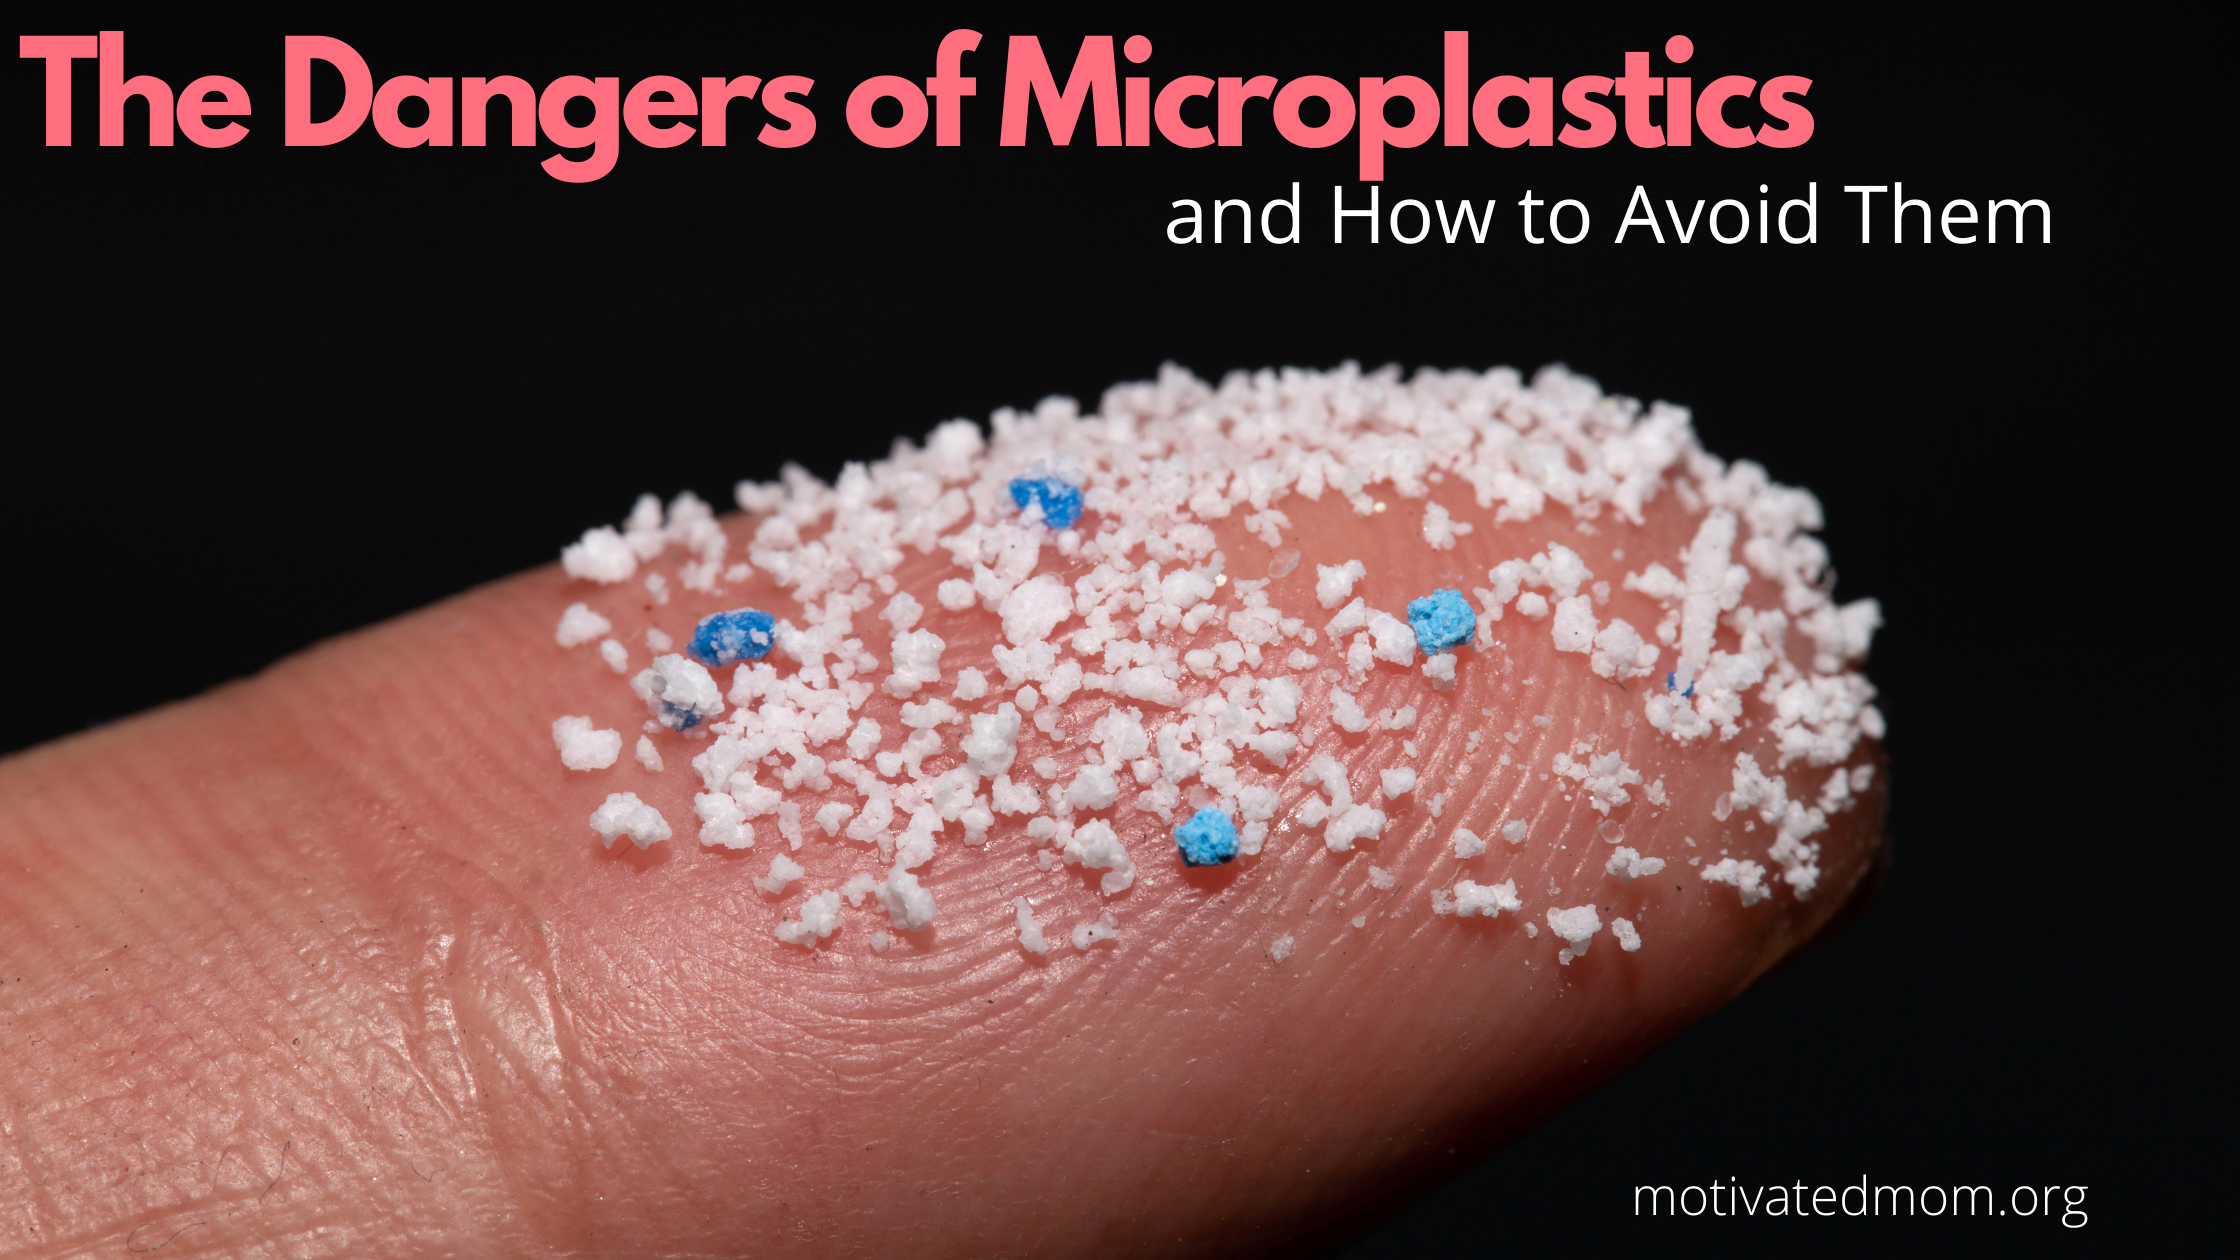 The Dangers of Microplastics and How to Avoid Them